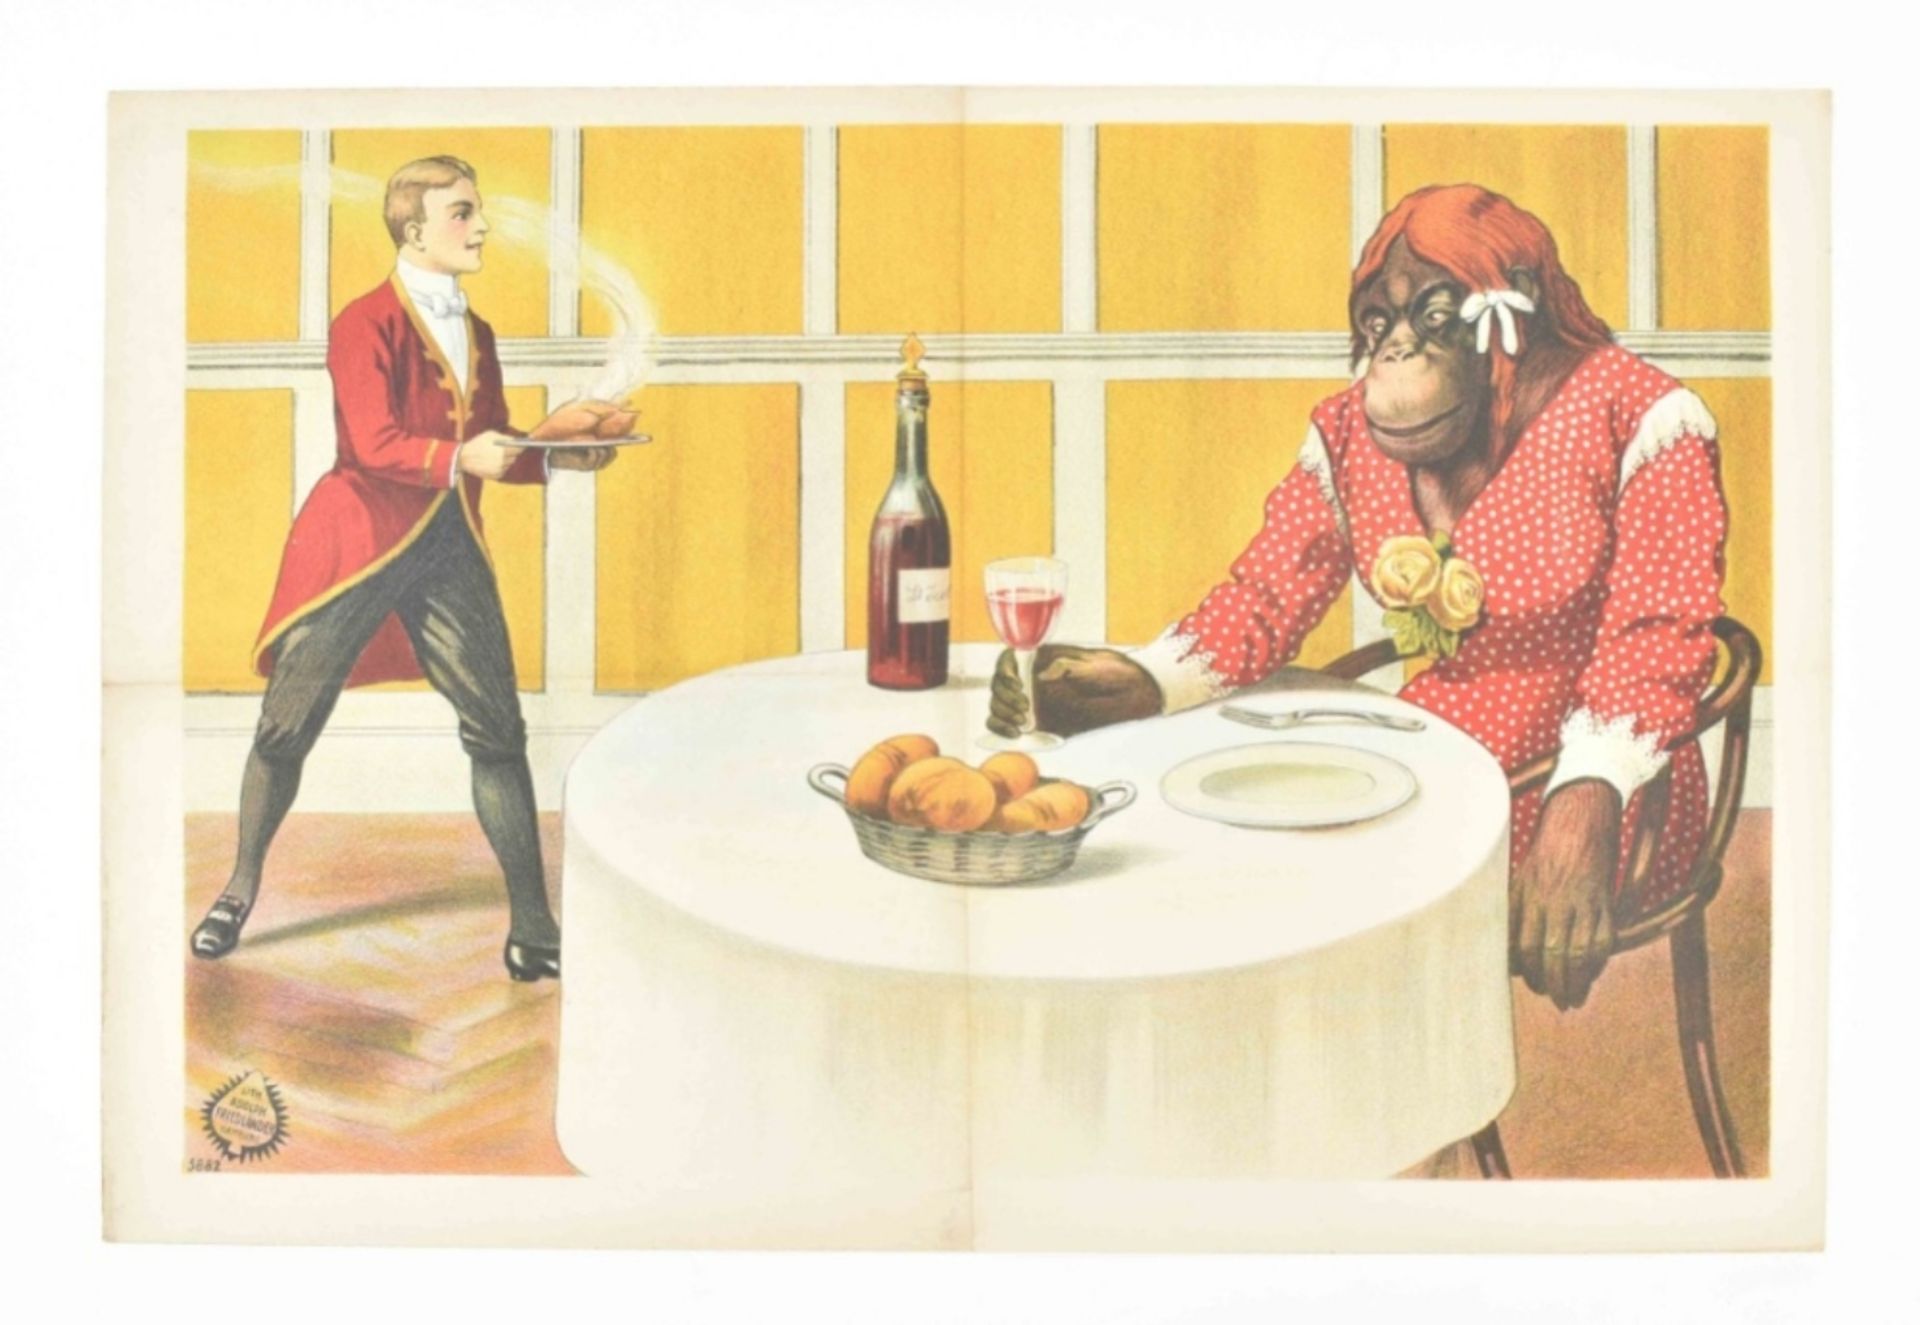 [Animal Dressage/Monkeys] Act of a Chimpansee dressed as a woman eating dinner. Friedländer, 1913